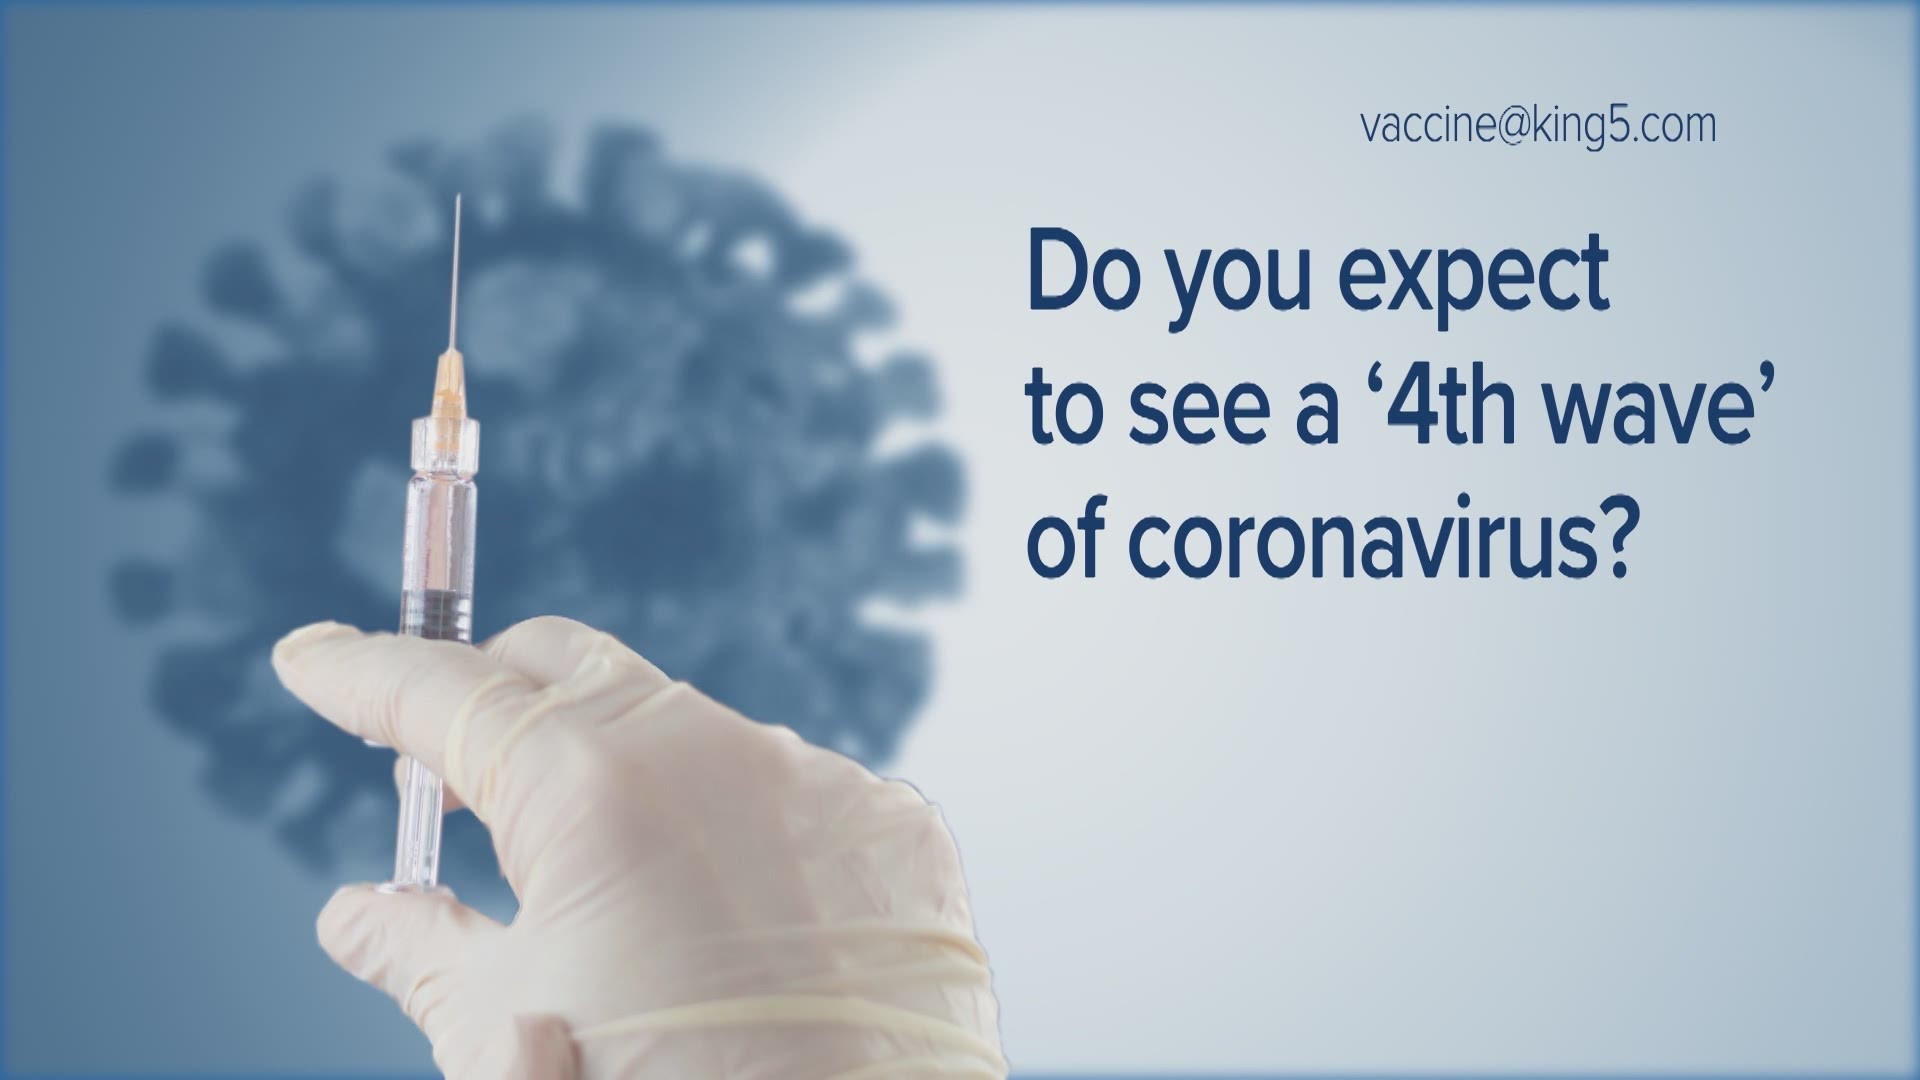 Dr. Larry Corey with Fred Hutchinson Cancer Research Center answers viewer questions about COVID-19 vaccines and the pandemic.